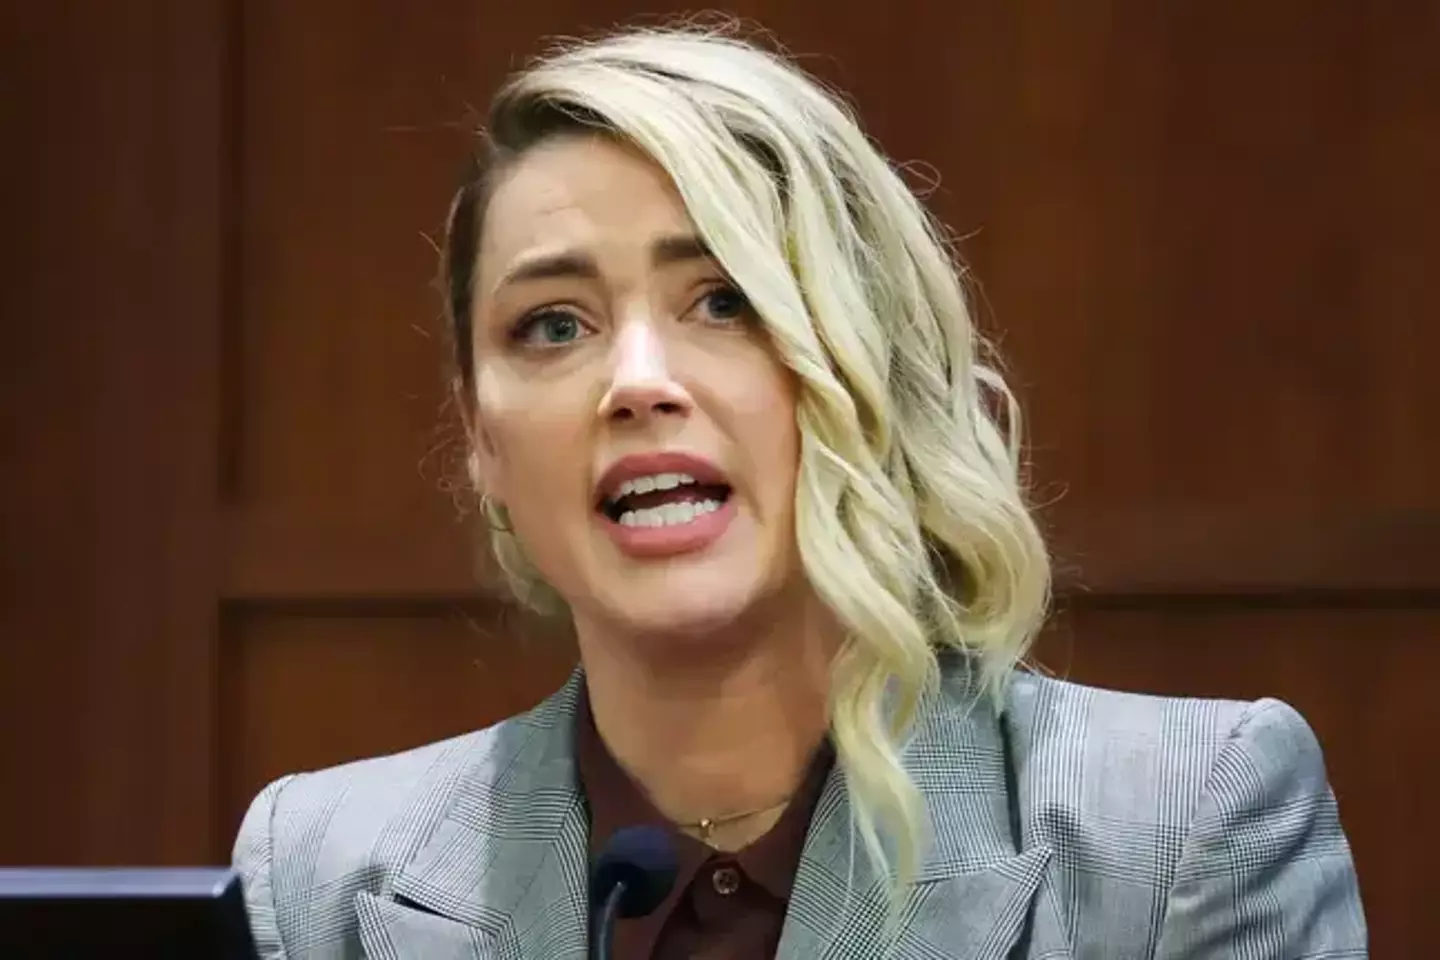 Amber Heard's team are requesting a mistrial.